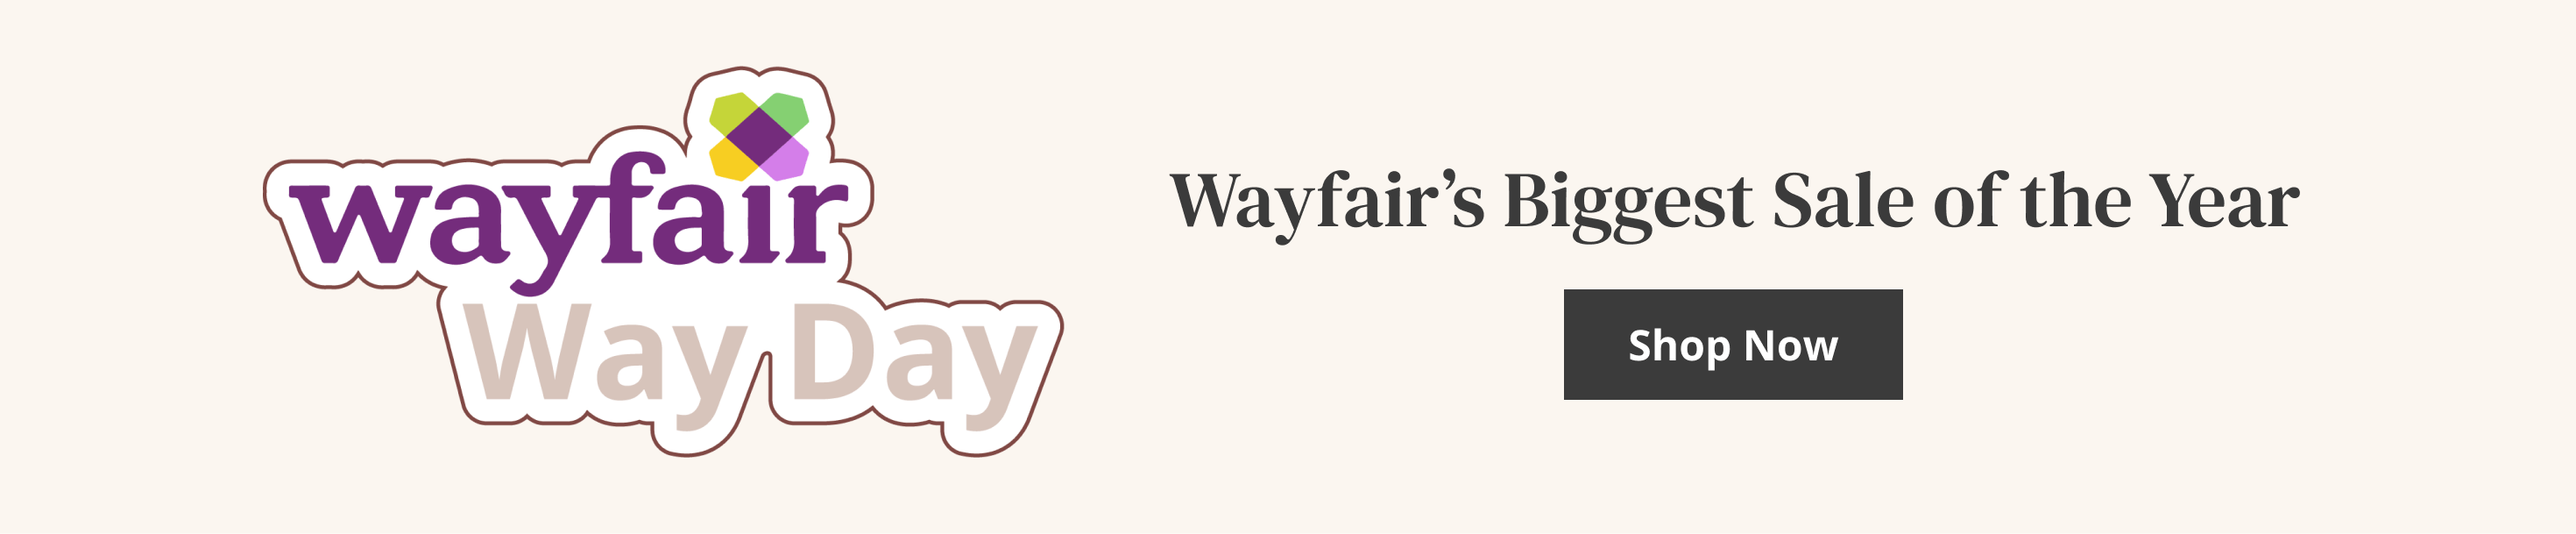 14 Hacks and Tips for WINNING All the Wayfair Deals - The Krazy